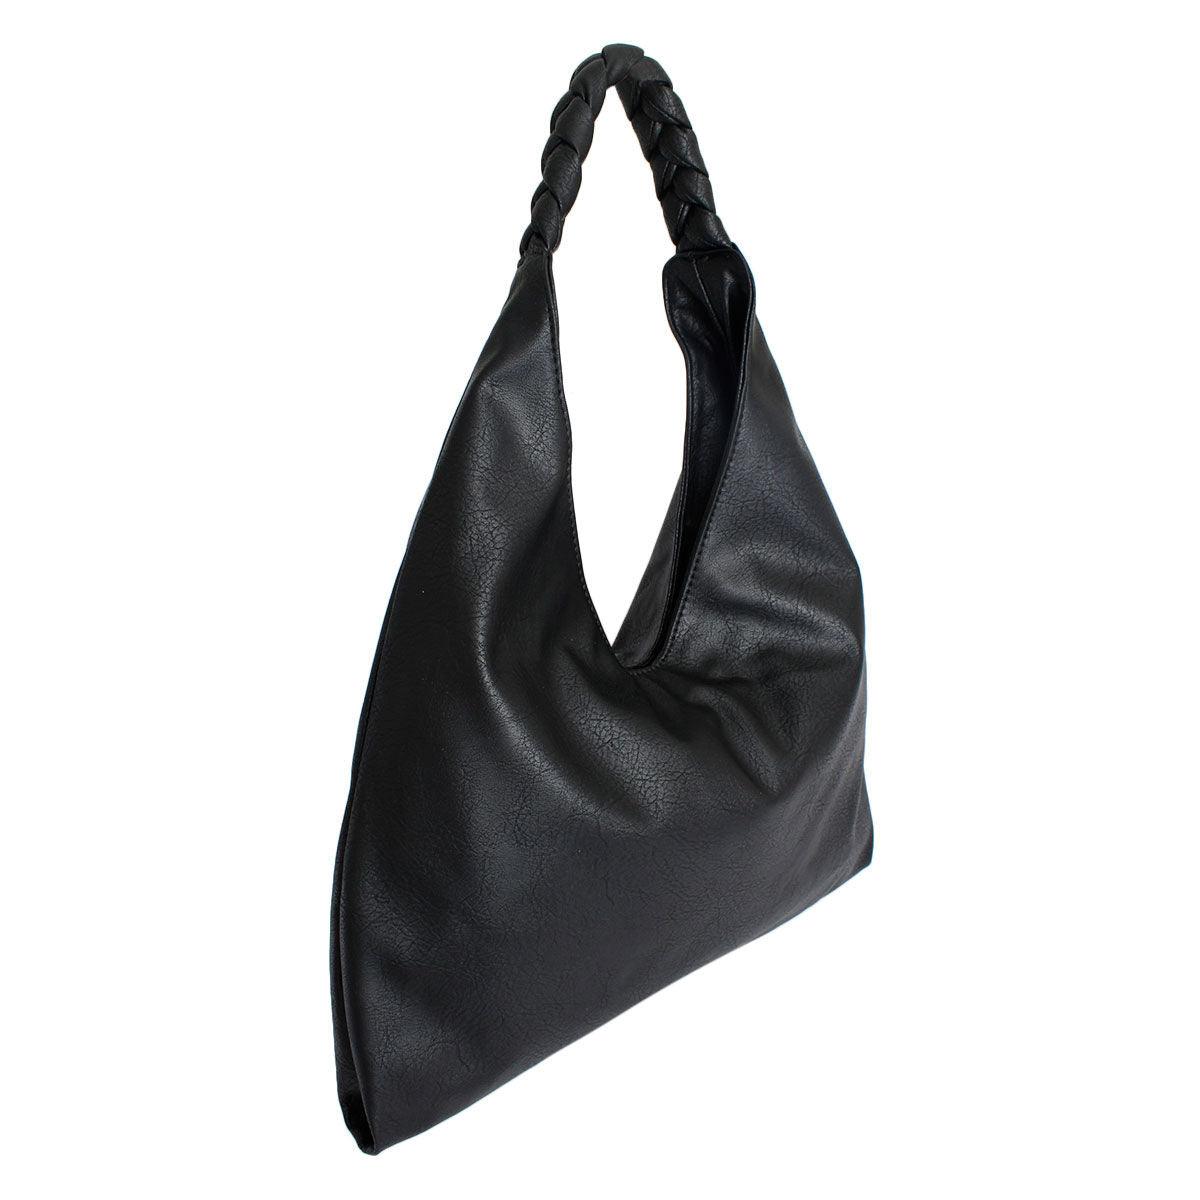 Stylish Black Vegan Leather Hobo Bag: Perfect Mix of Fashion and Function for Everyday Use